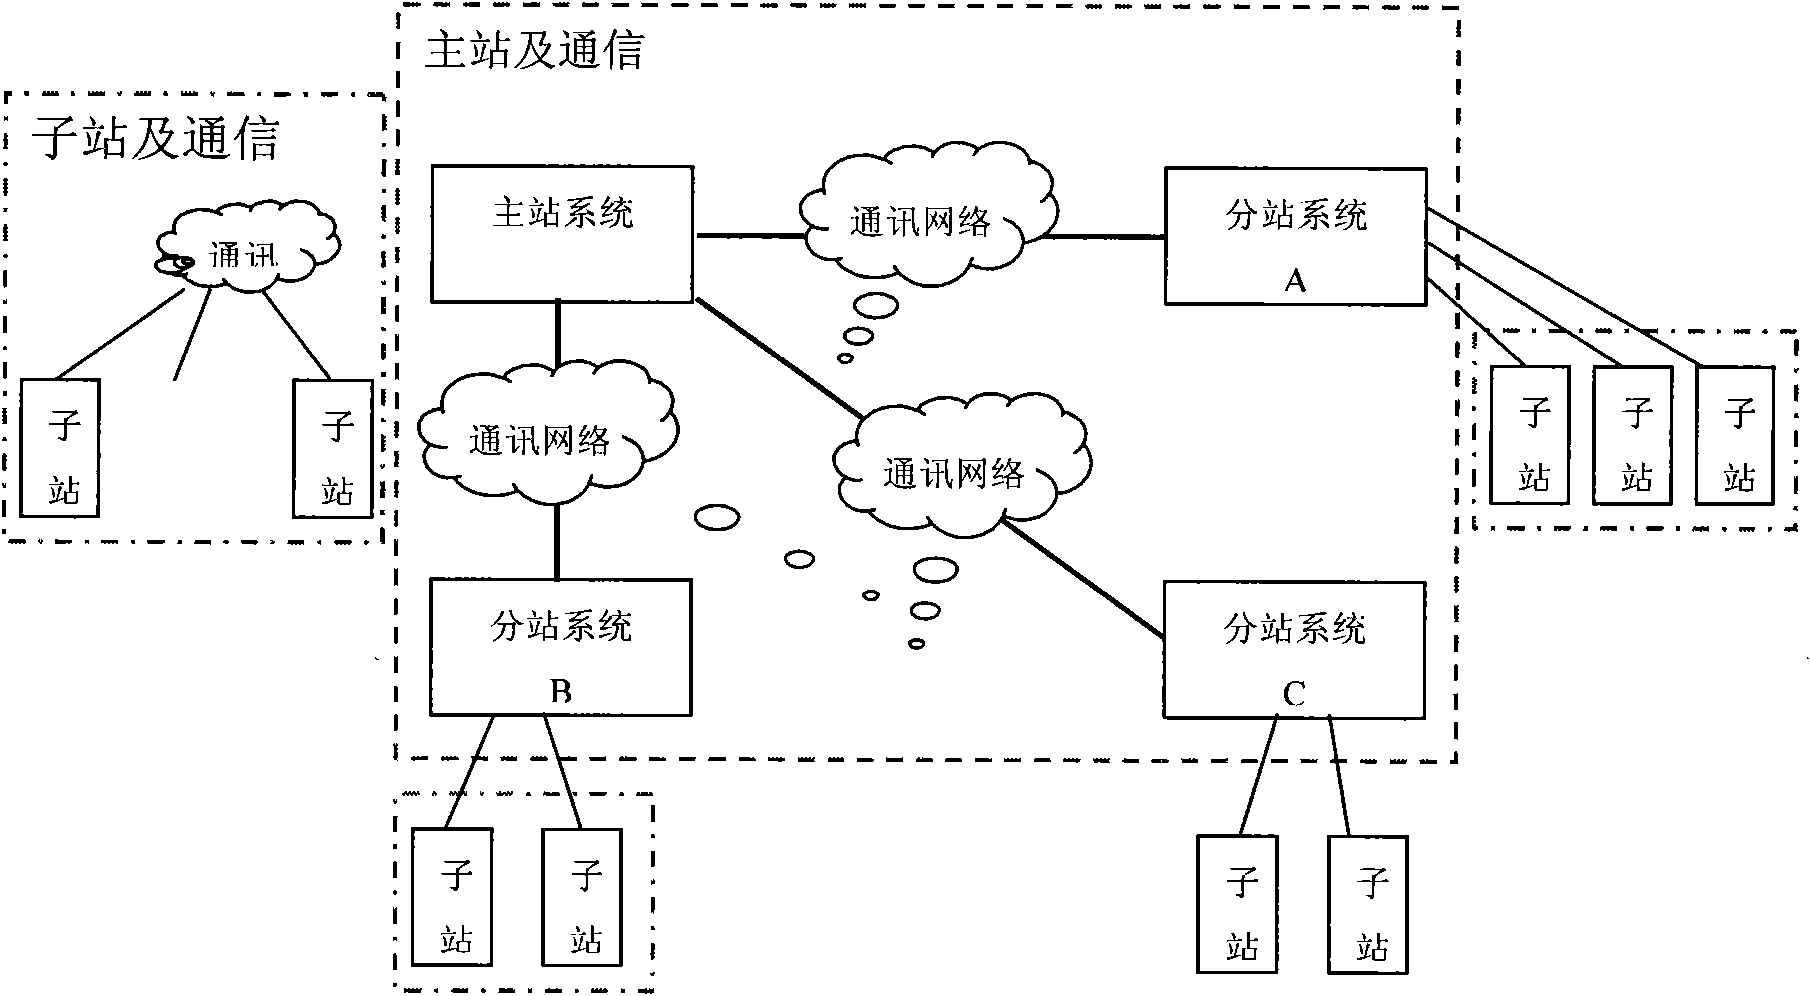 Electric network relay protection and fault analysis system